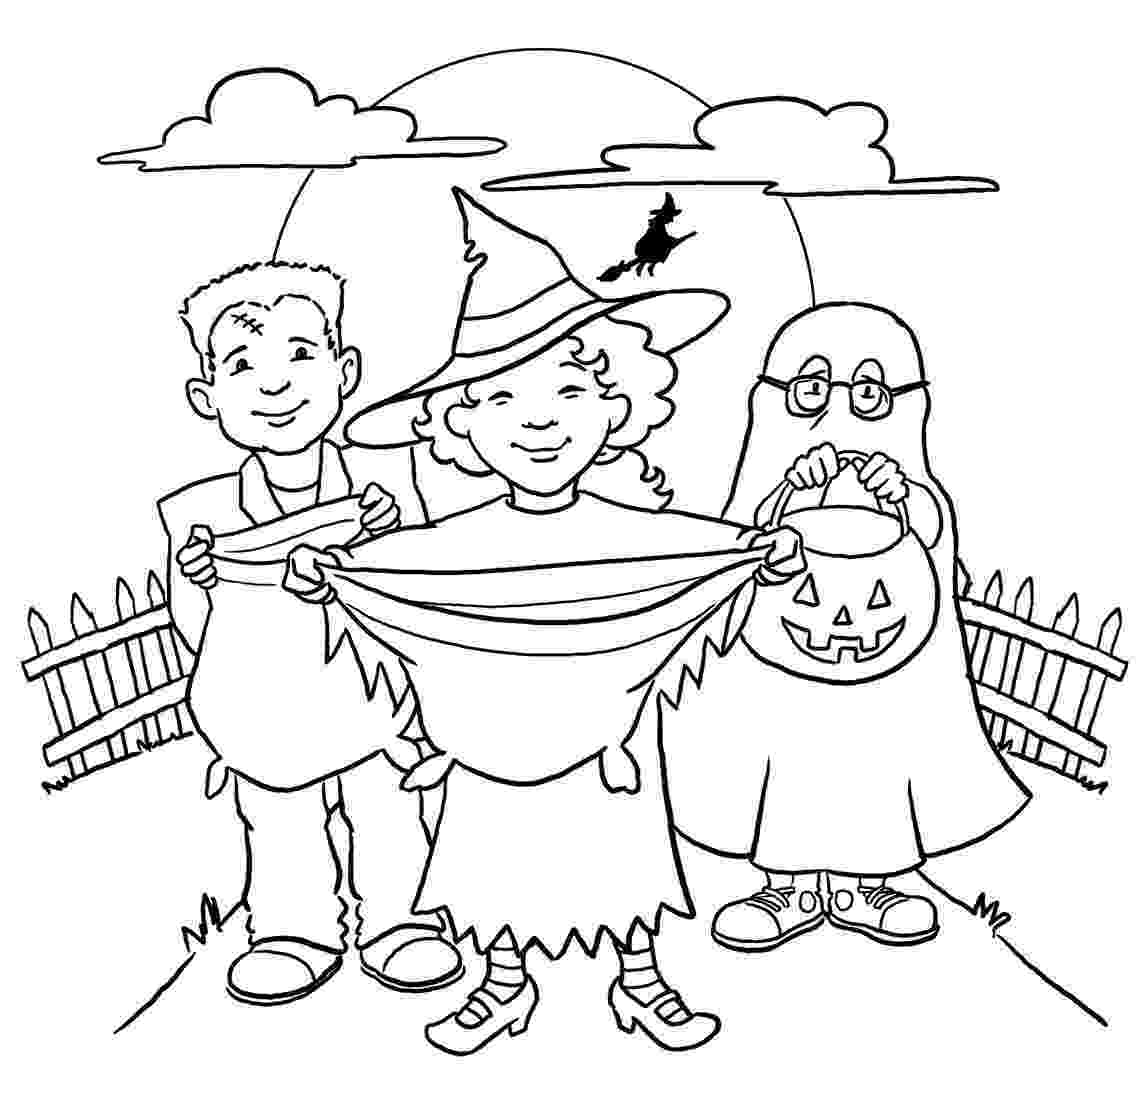 halloween coloring pages trick or treat trick or treat worksheet educationcom treat trick pages halloween coloring or 